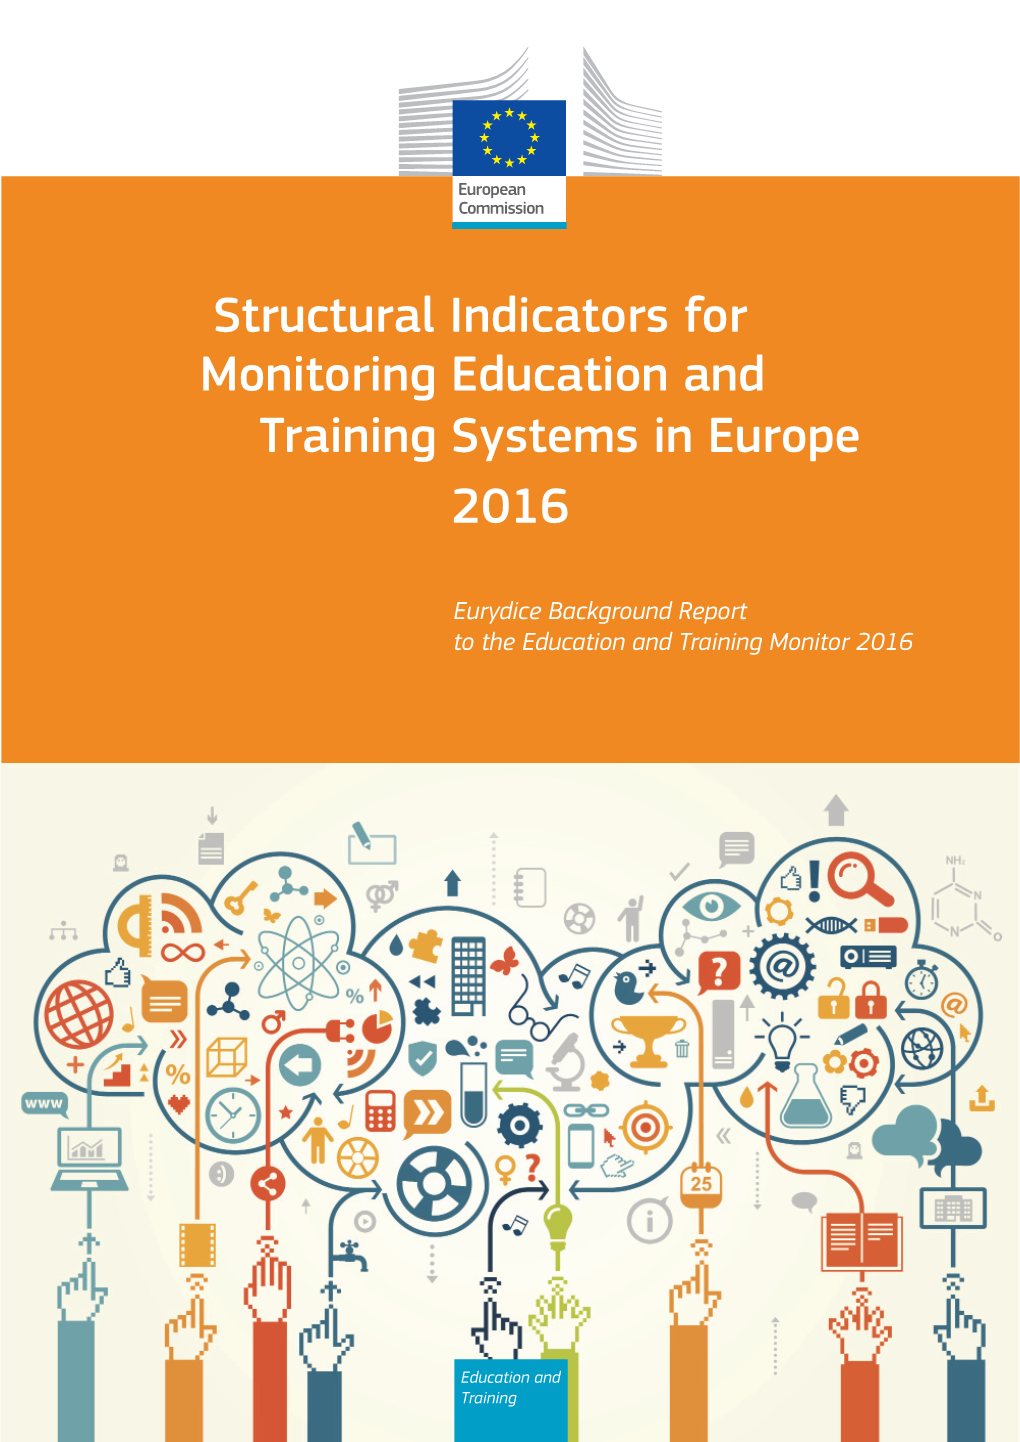 Structural Indicators for Monitoring Education and Training Systems in Europe 2016